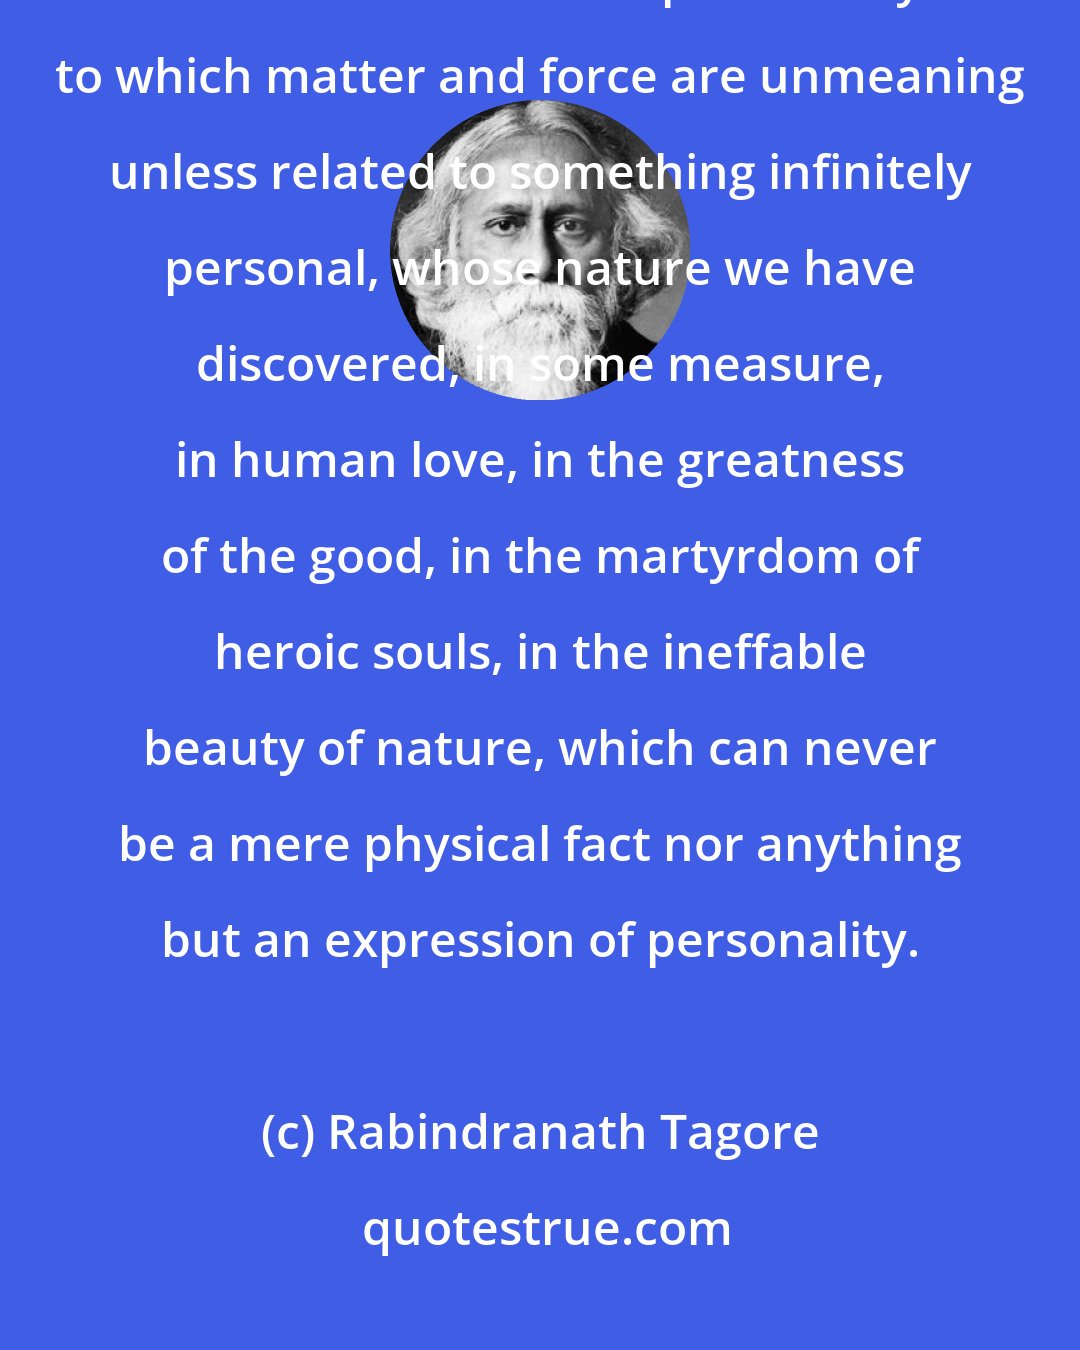 Rabindranath Tagore: We cannot look upon our lives as dreams of a dreamer who has no awakening in all time. We have a personality to which matter and force are unmeaning unless related to something infinitely personal, whose nature we have discovered, in some measure, in human love, in the greatness of the good, in the martyrdom of heroic souls, in the ineffable beauty of nature, which can never be a mere physical fact nor anything but an expression of personality.